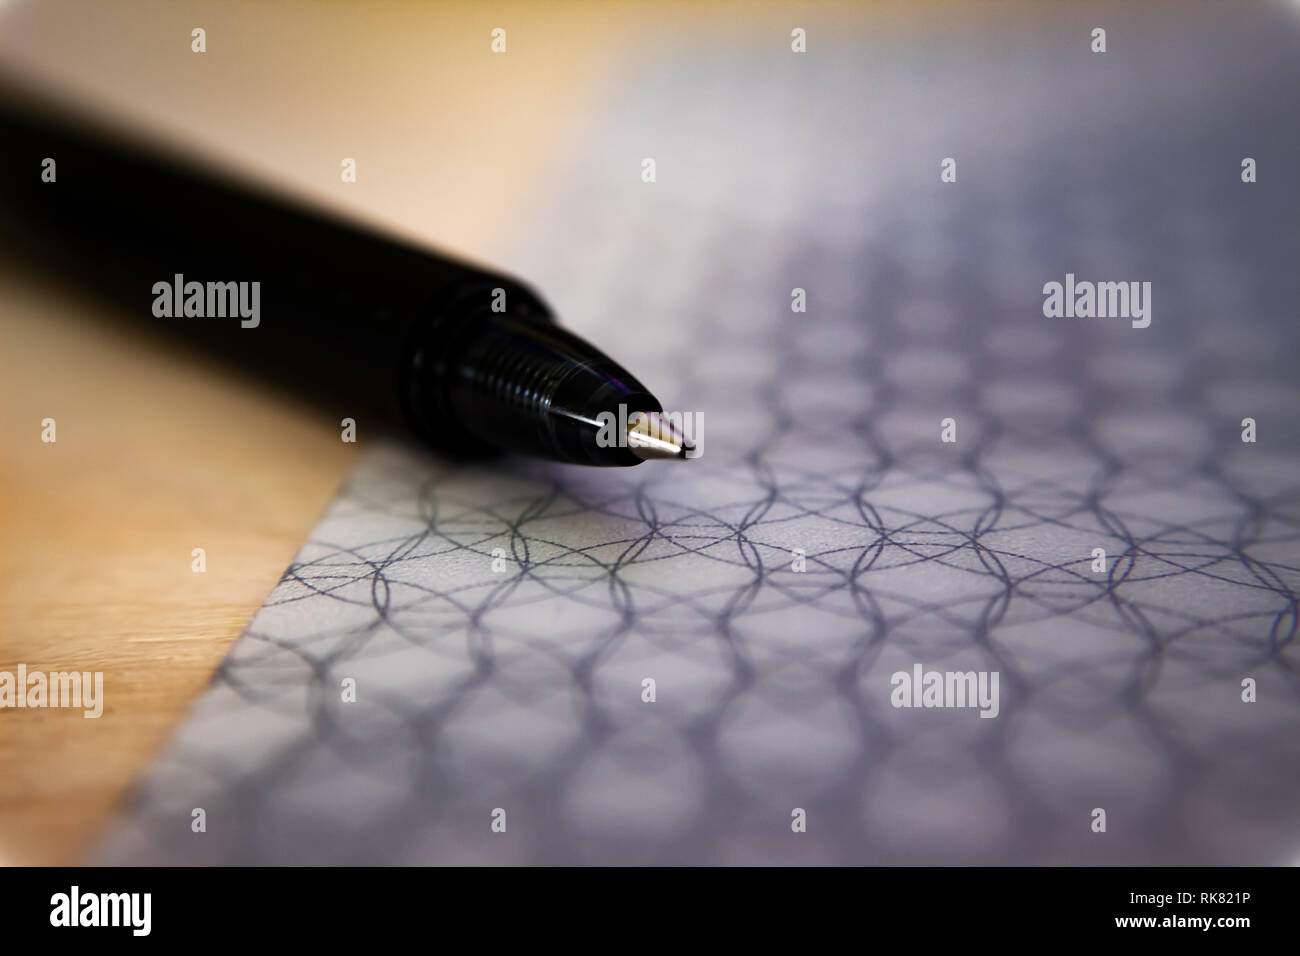 Close up picture of a ball point pen. Stock Photo